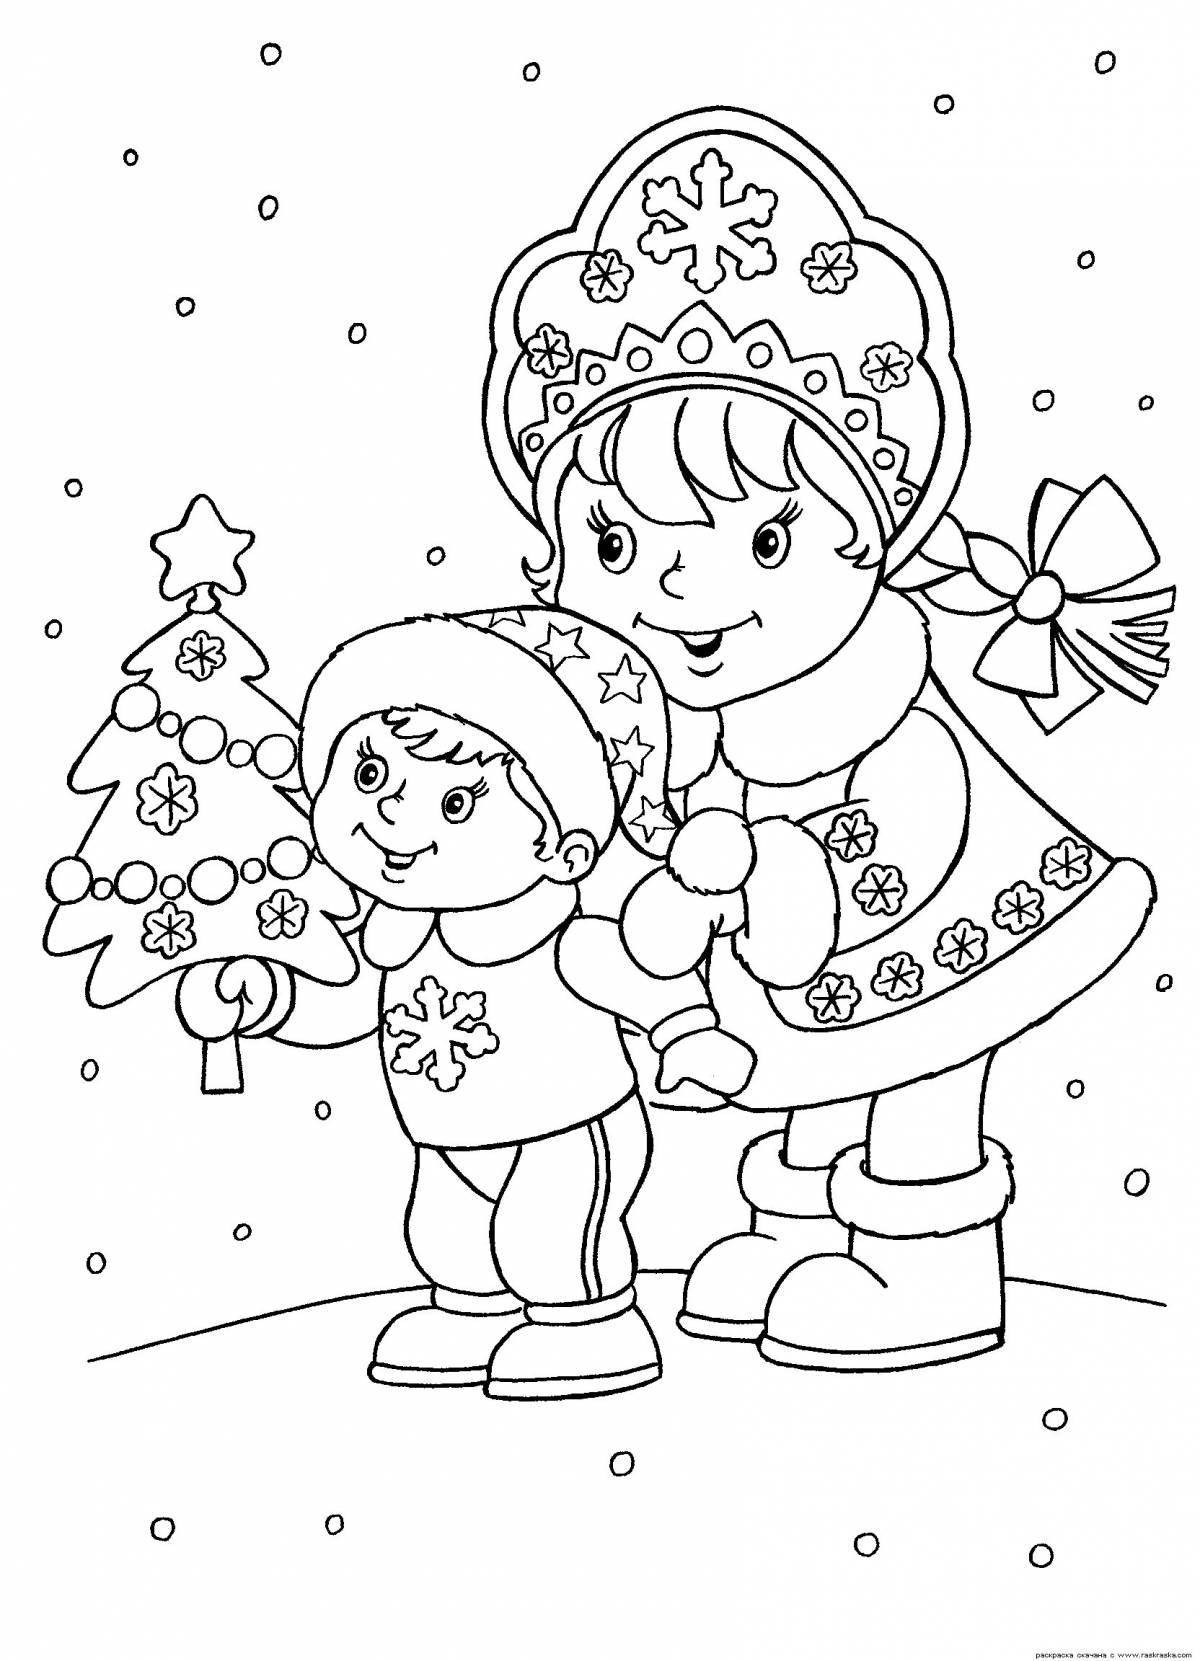 Cute coloring tree and snow maiden